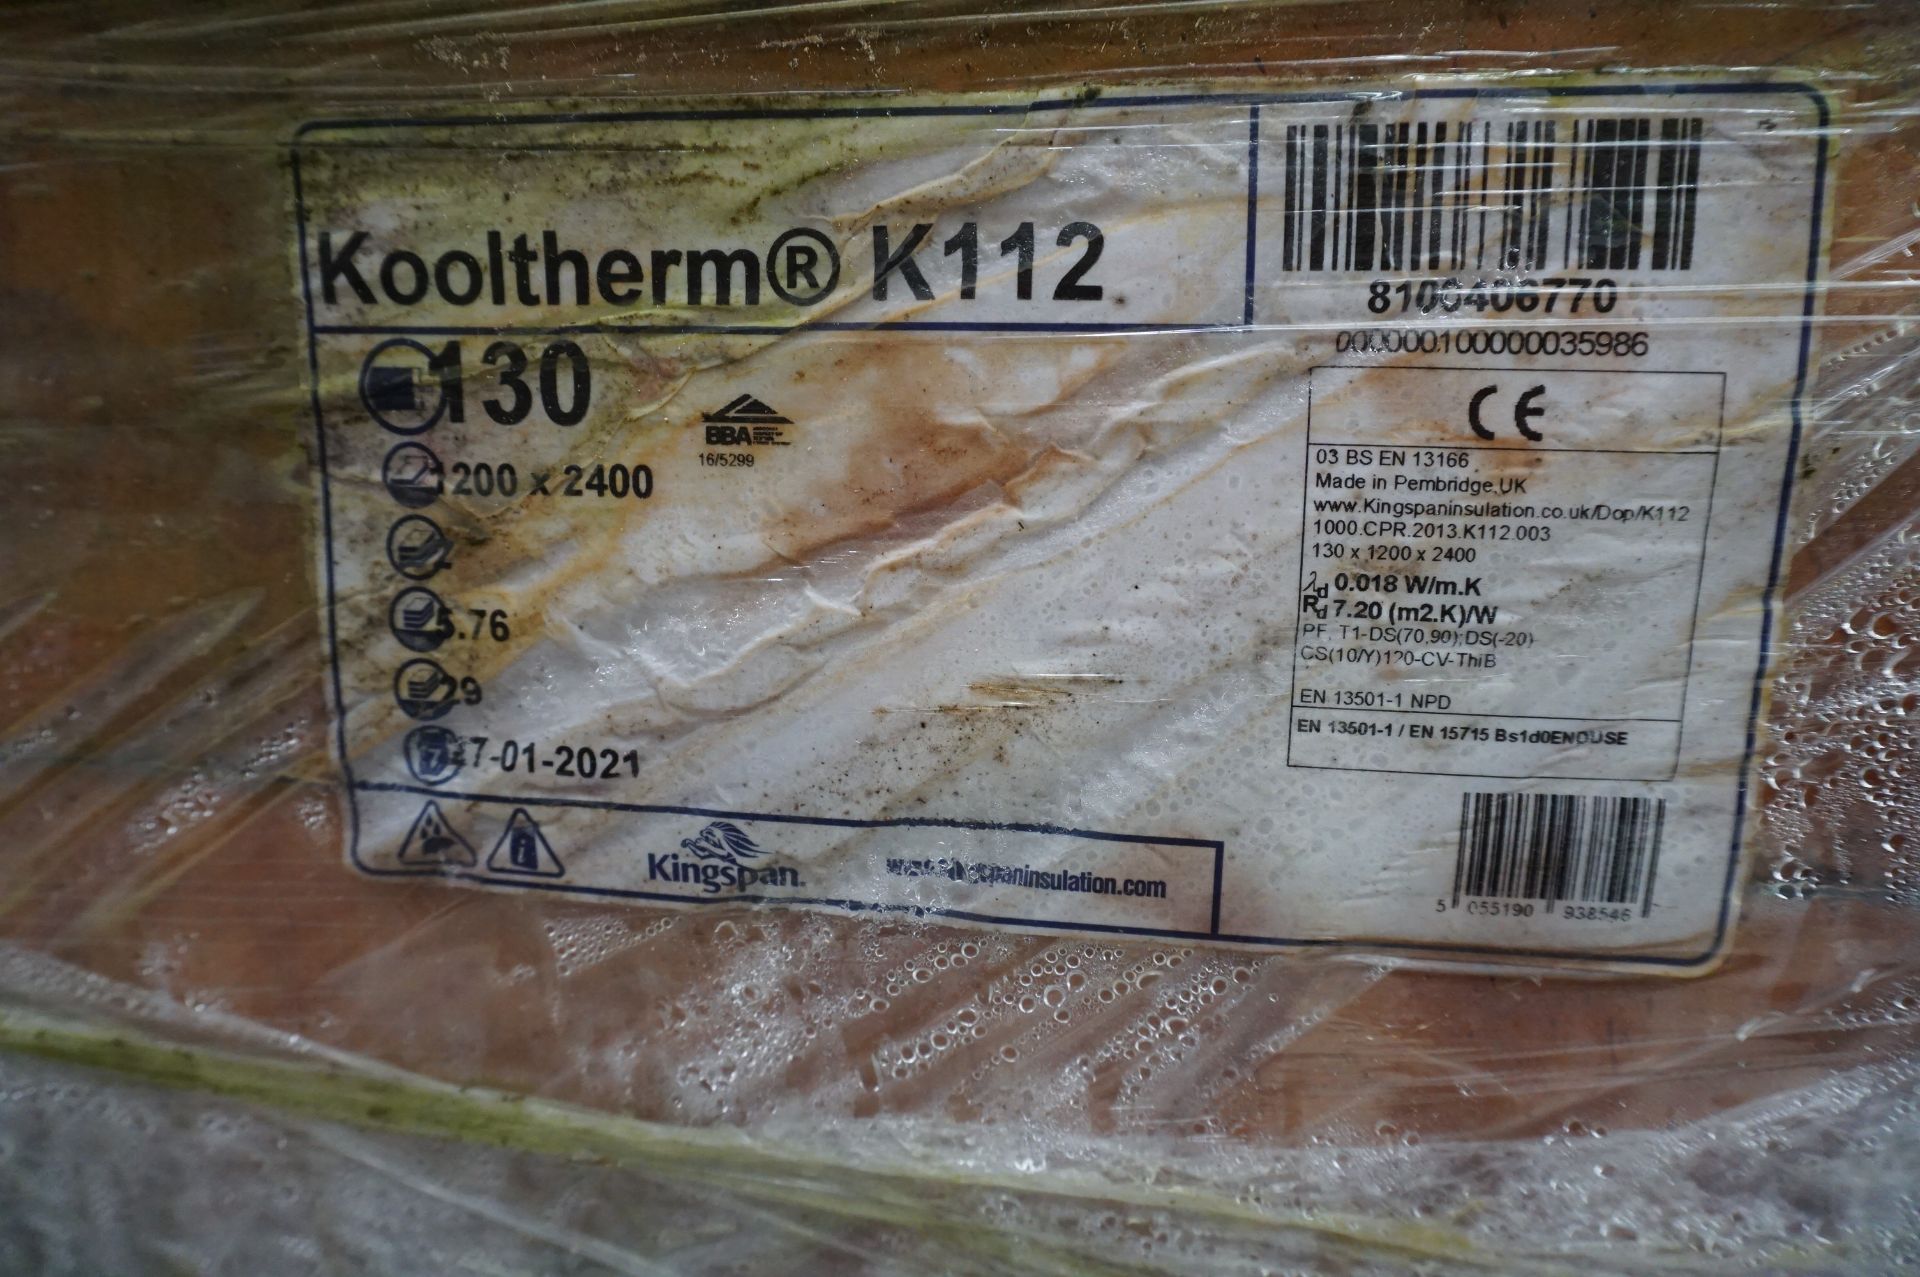 Kingspan, Kooltherm K112 framing insulation board, 1200 x 2400 x 130mm, 4 packs of 2 boards - Image 3 of 4